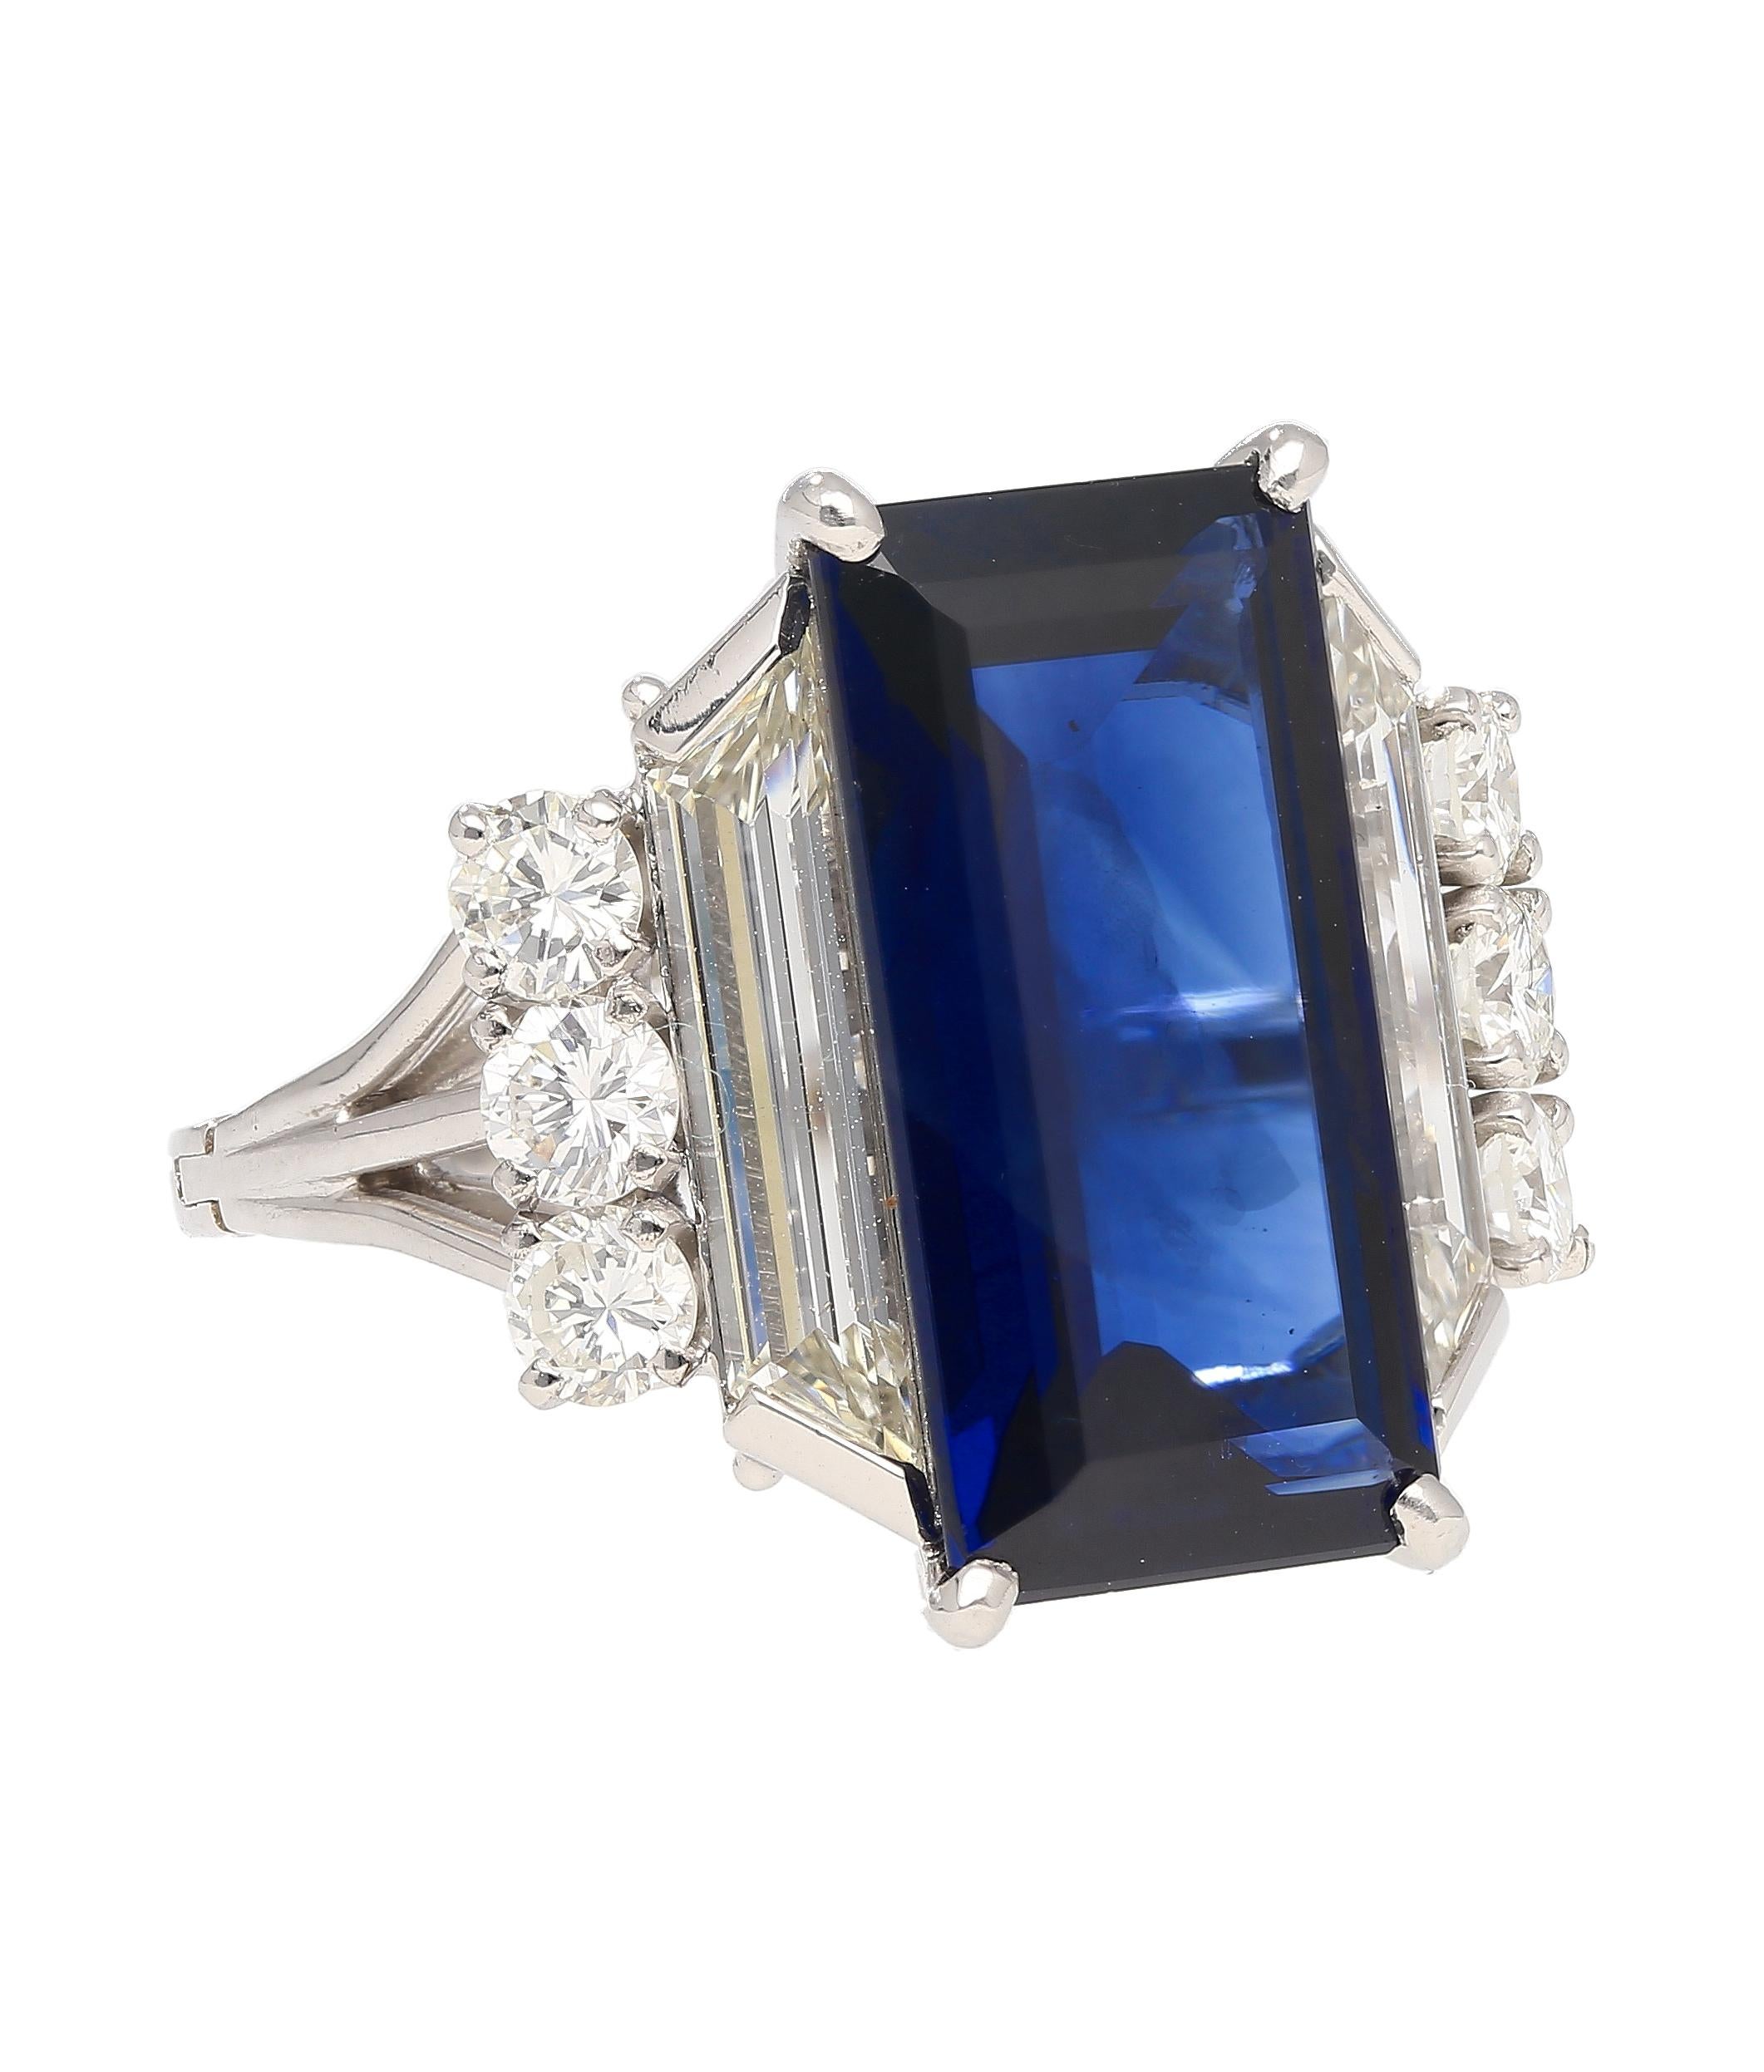 Shop this magnificent Blue Sapphire and Diamond ring. This certified ring features a Blue Sapphire to die for! It radiates deep blue color hues (especially under sunlight). Excellent cut and Emerald cut with mirror-like step facets executed to